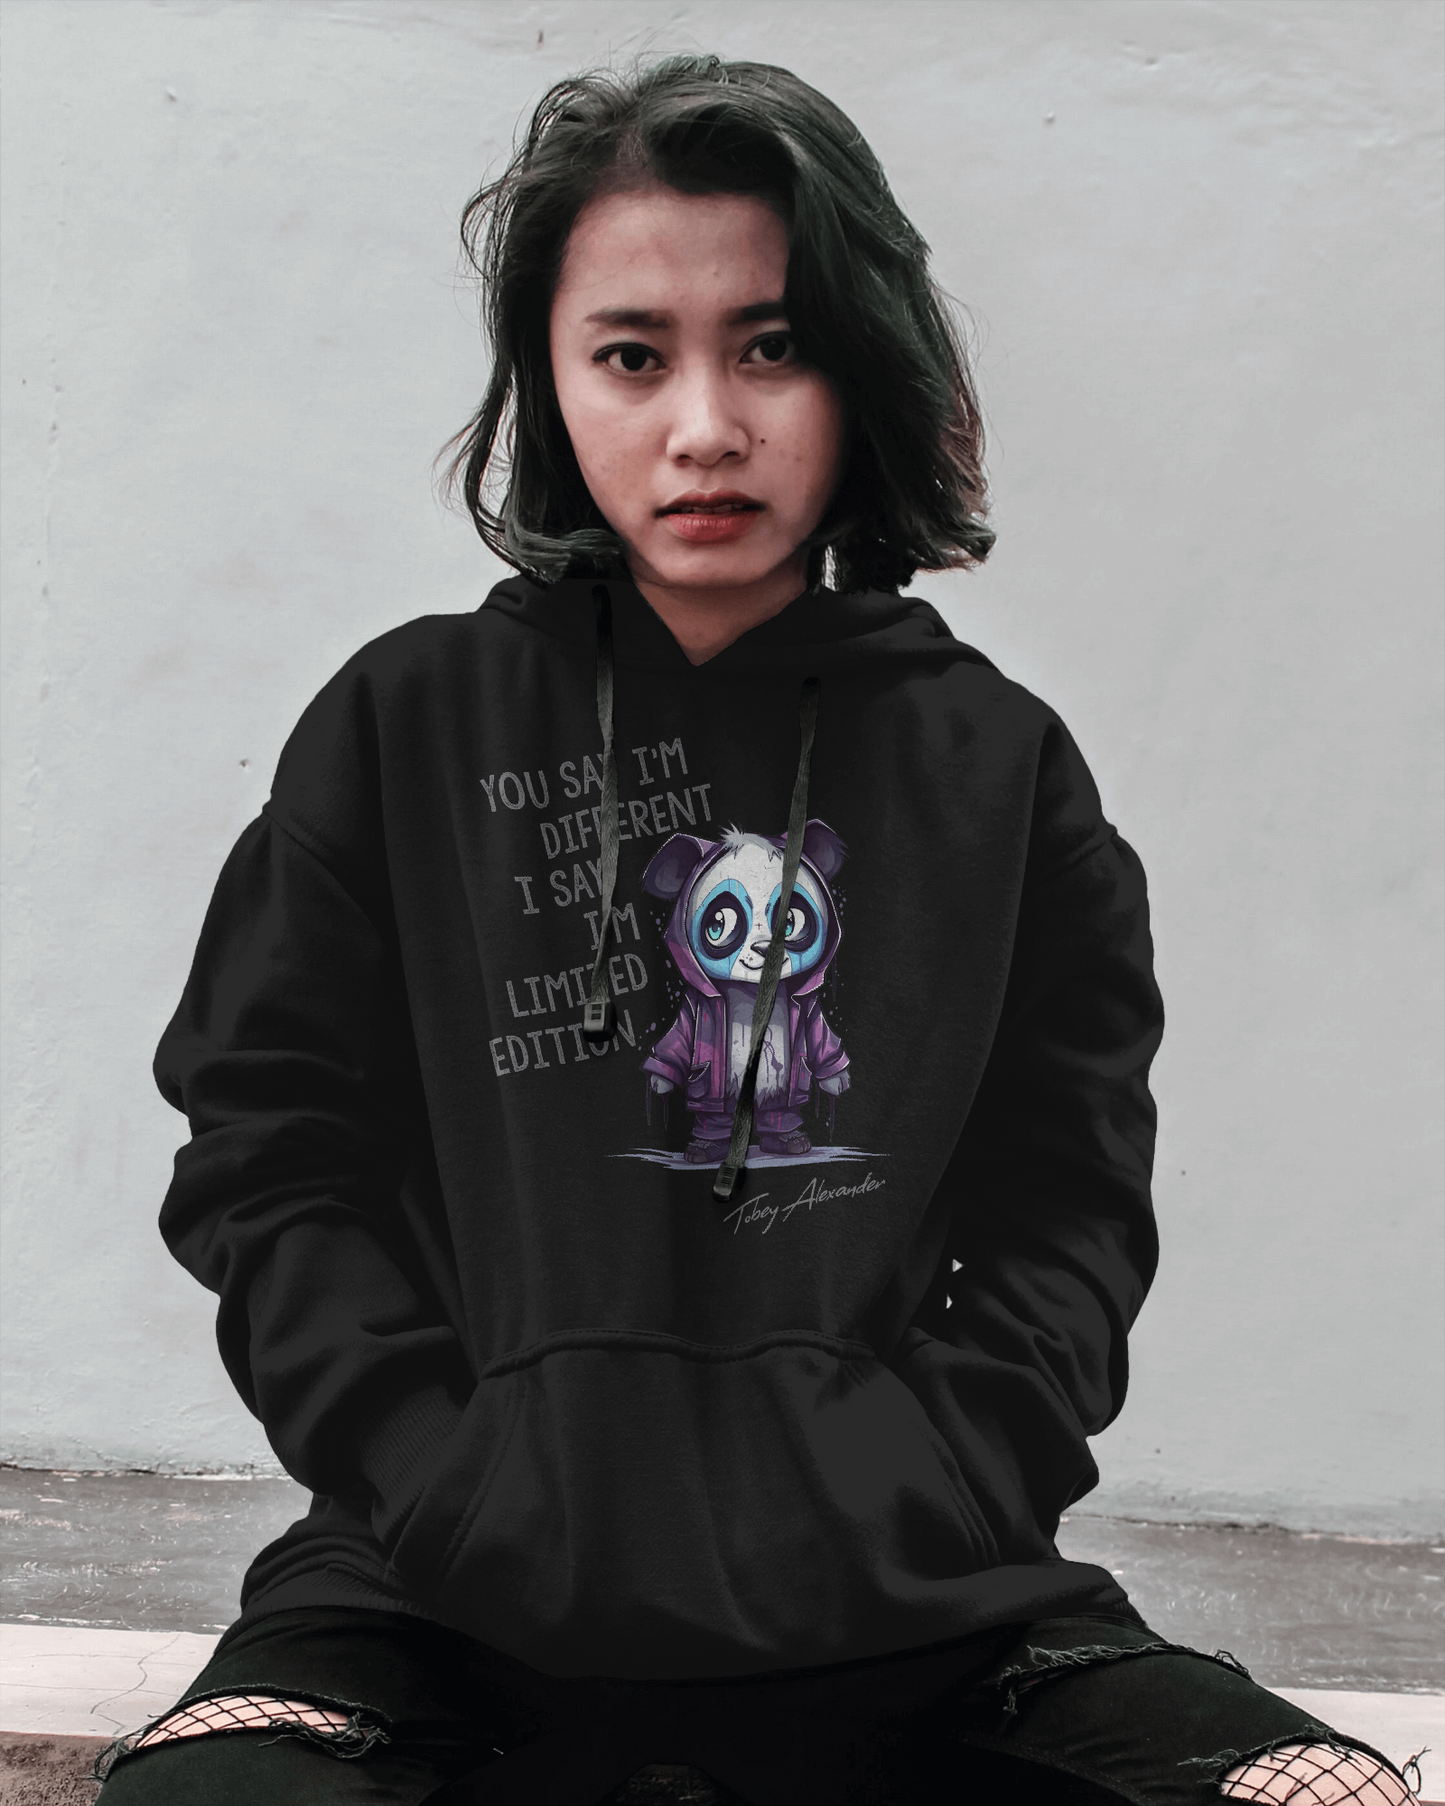 Embrace Uniqueness: I'm Limited Edition Premium Unisex Pullover Hoodie